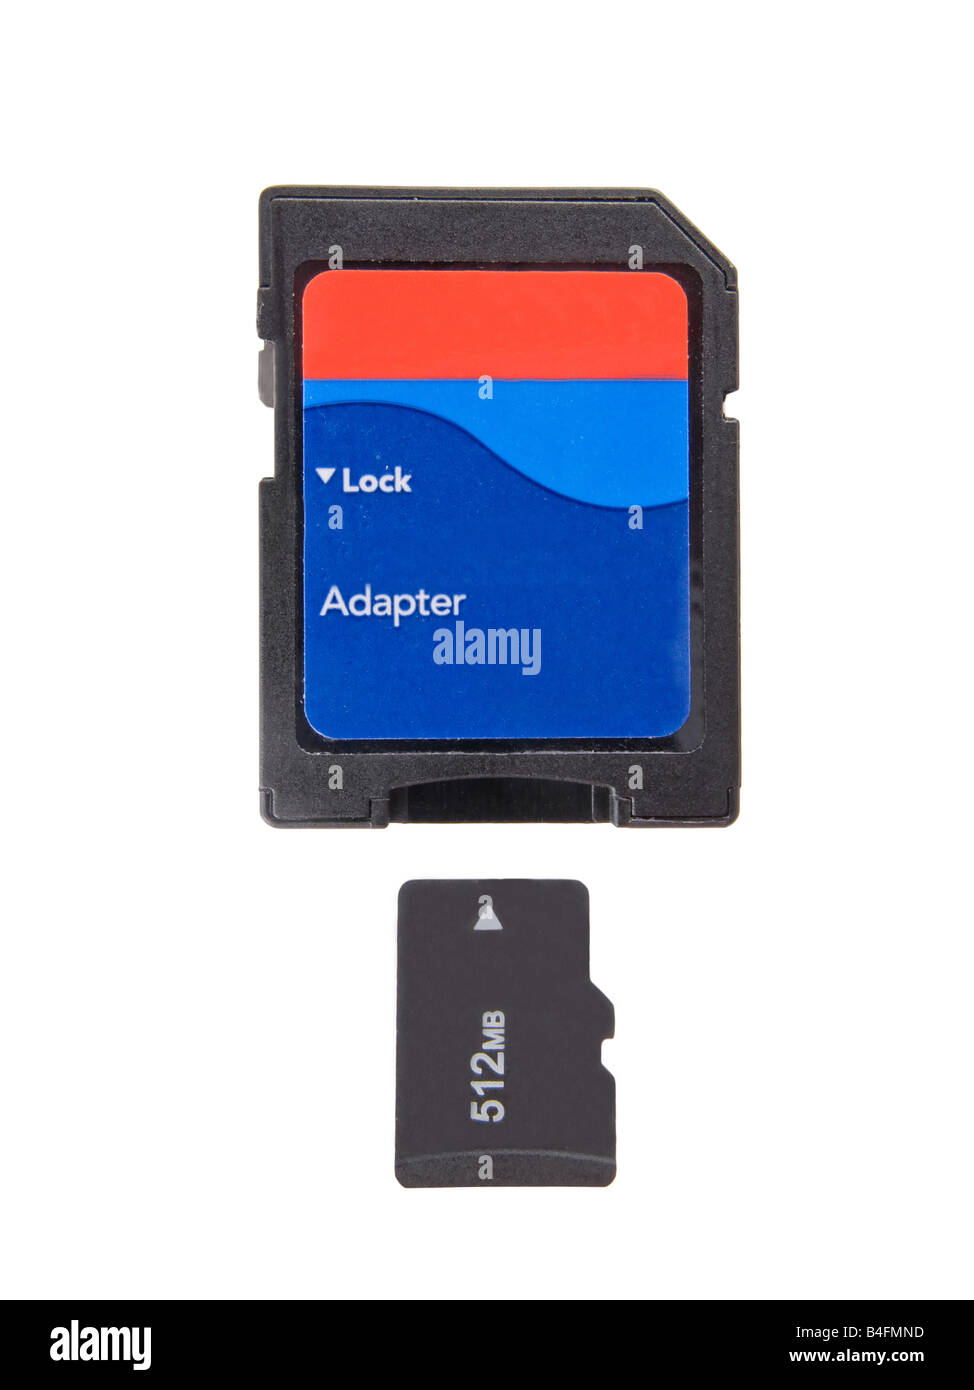 Memory card reader in use with a Sandisk Compact Flash card Stock Photo -  Alamy